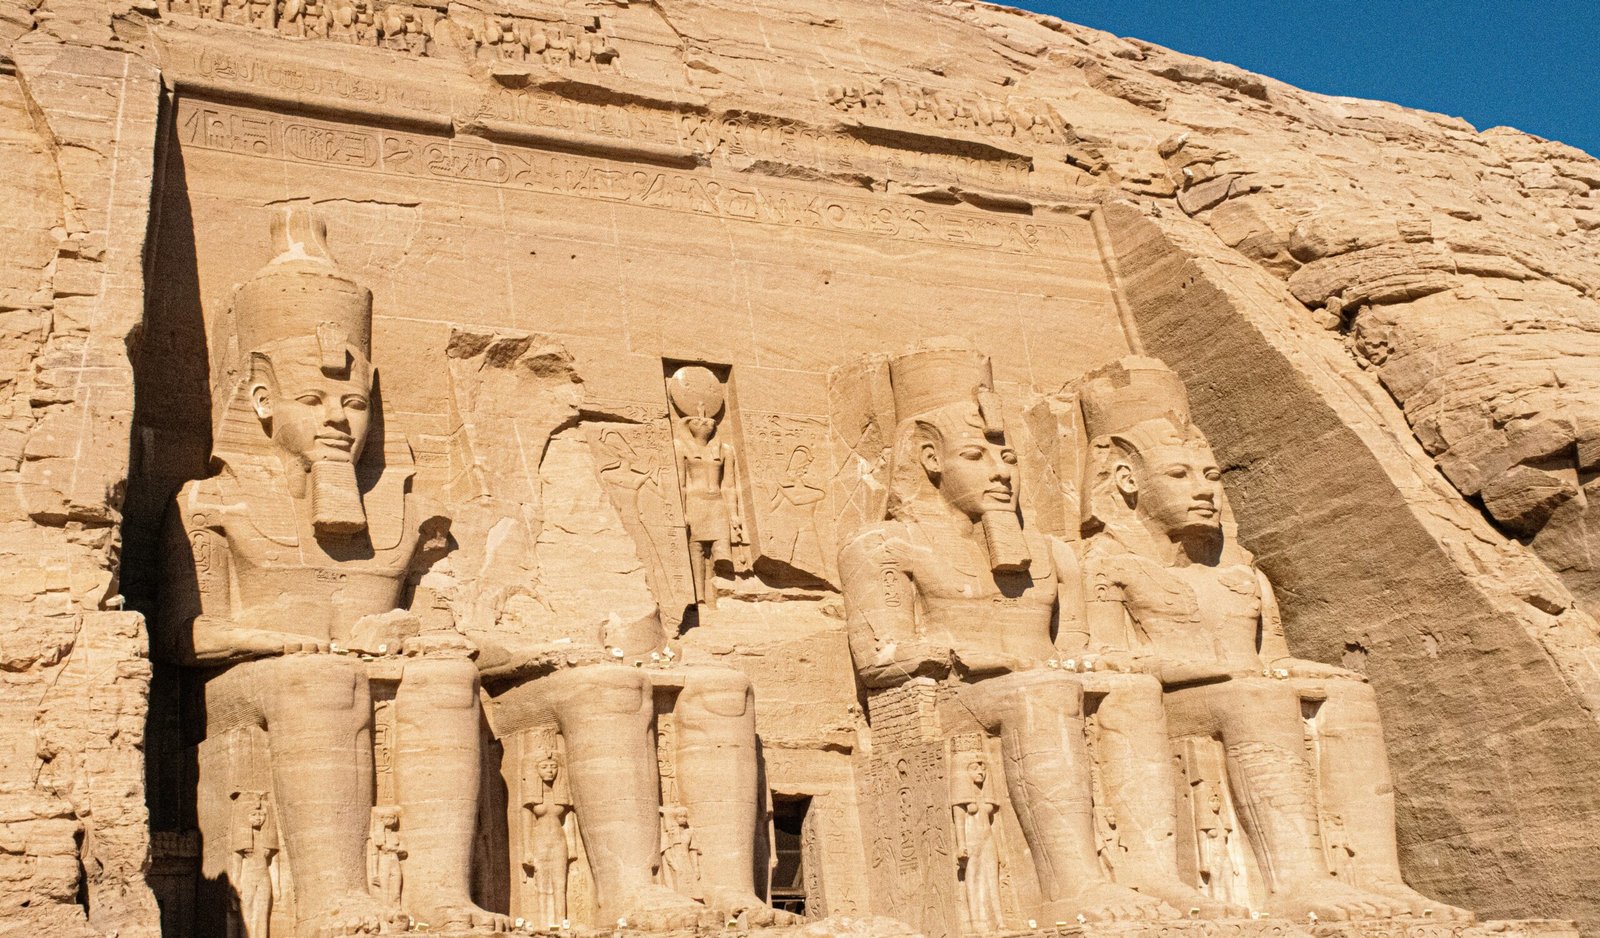 Enjoy your private day tour to Abu Simbel from Aswan by car